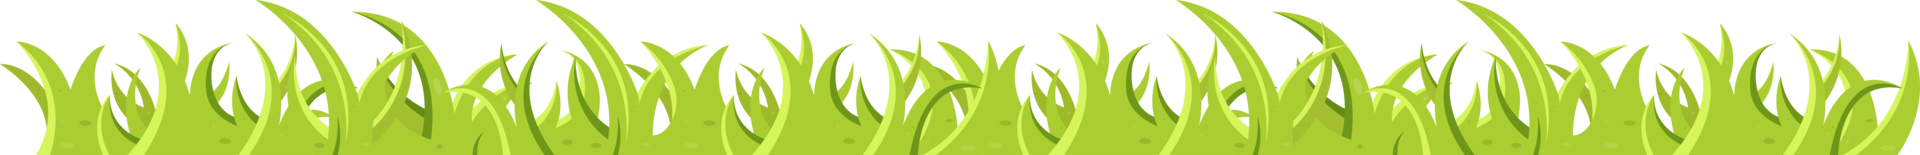 Green grass and leaves in cartoon style png